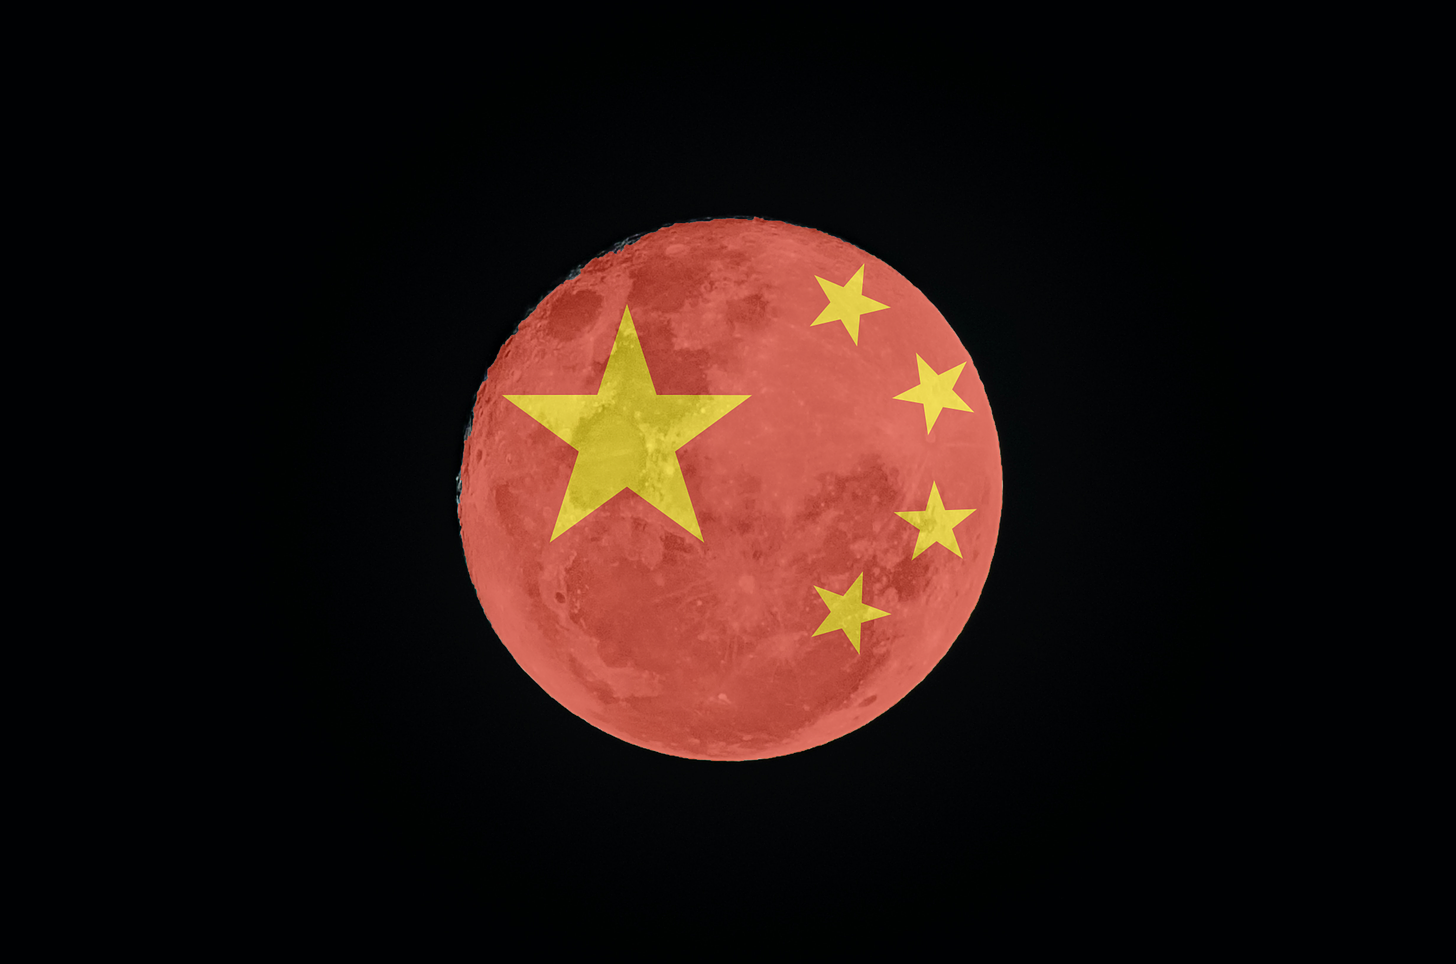 The moon with the China flag superimposed on it